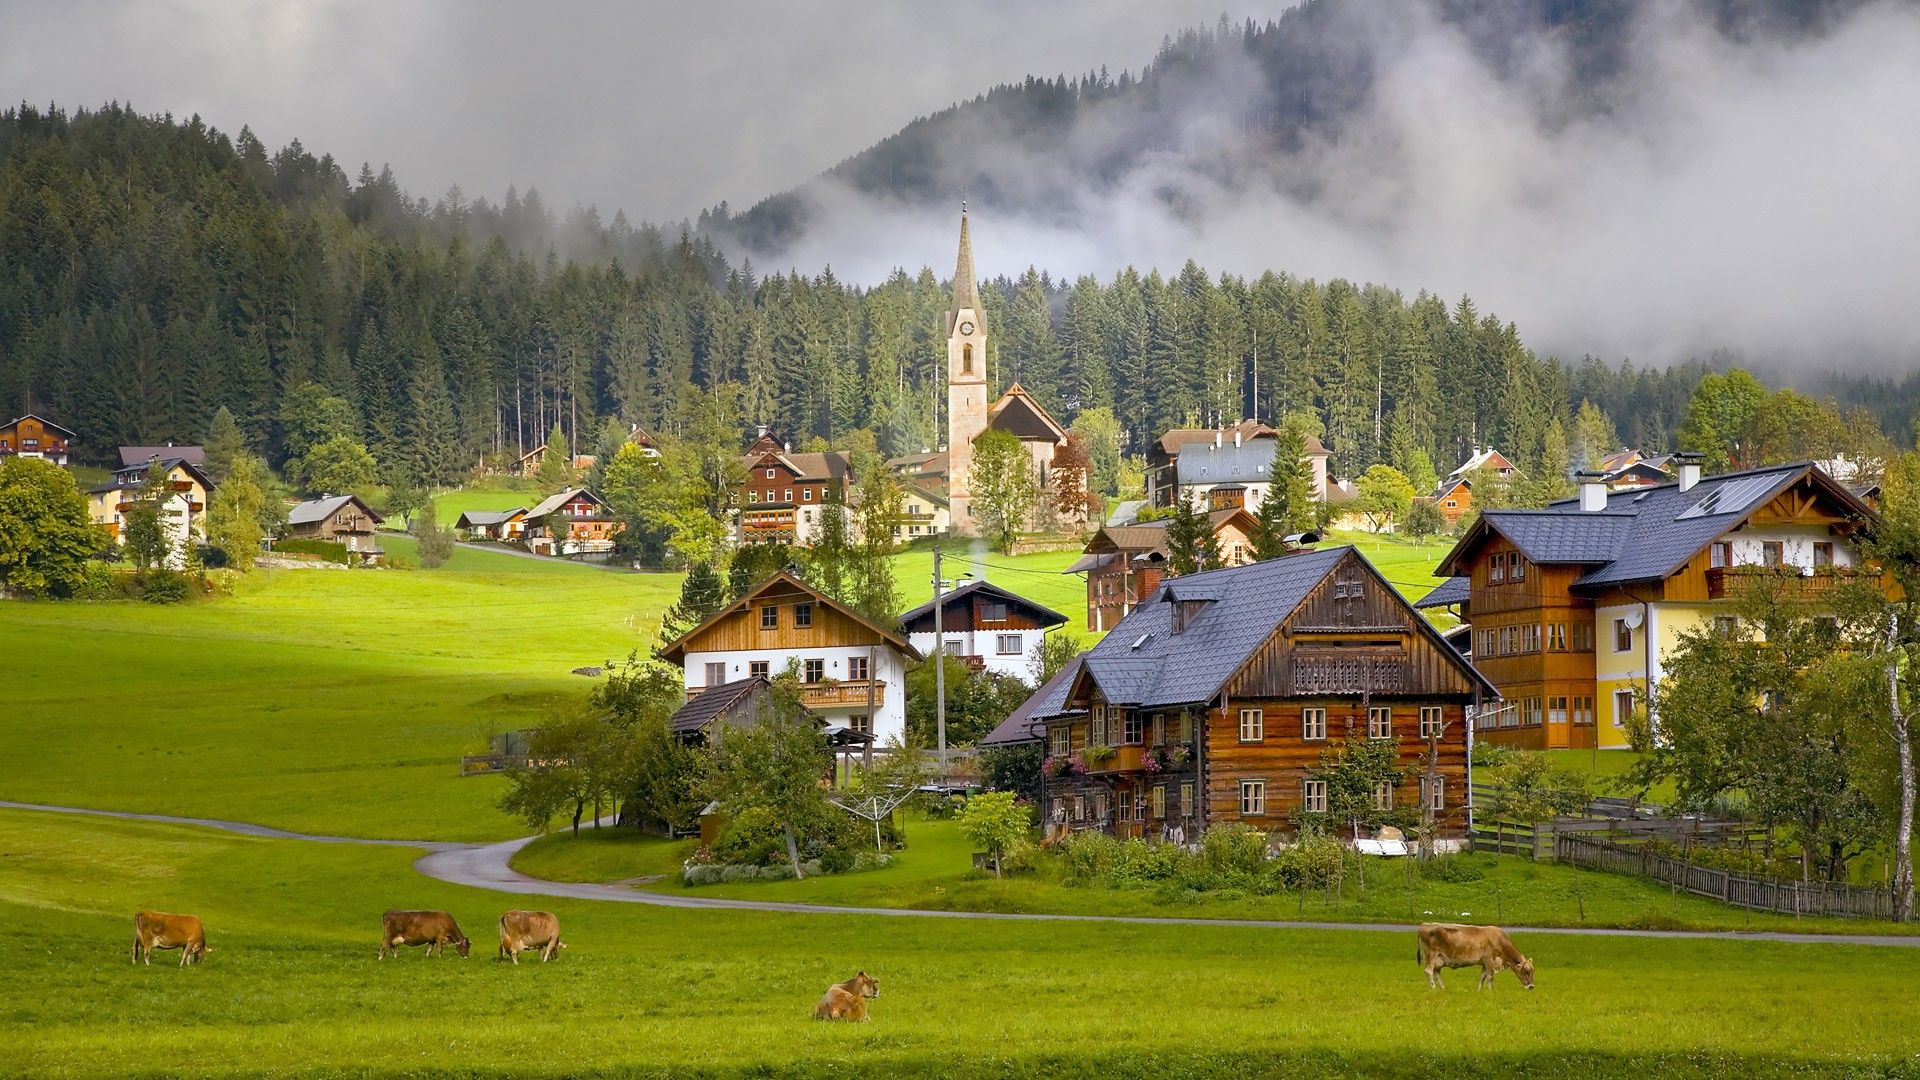 #wood, #trees, #mist, #building, #forest, #town, #road, #villages, # house, #animals, #grass, #Austria, #cow, #architecture, #church, #nature, wallpaper. Mocah HD Wallpaper